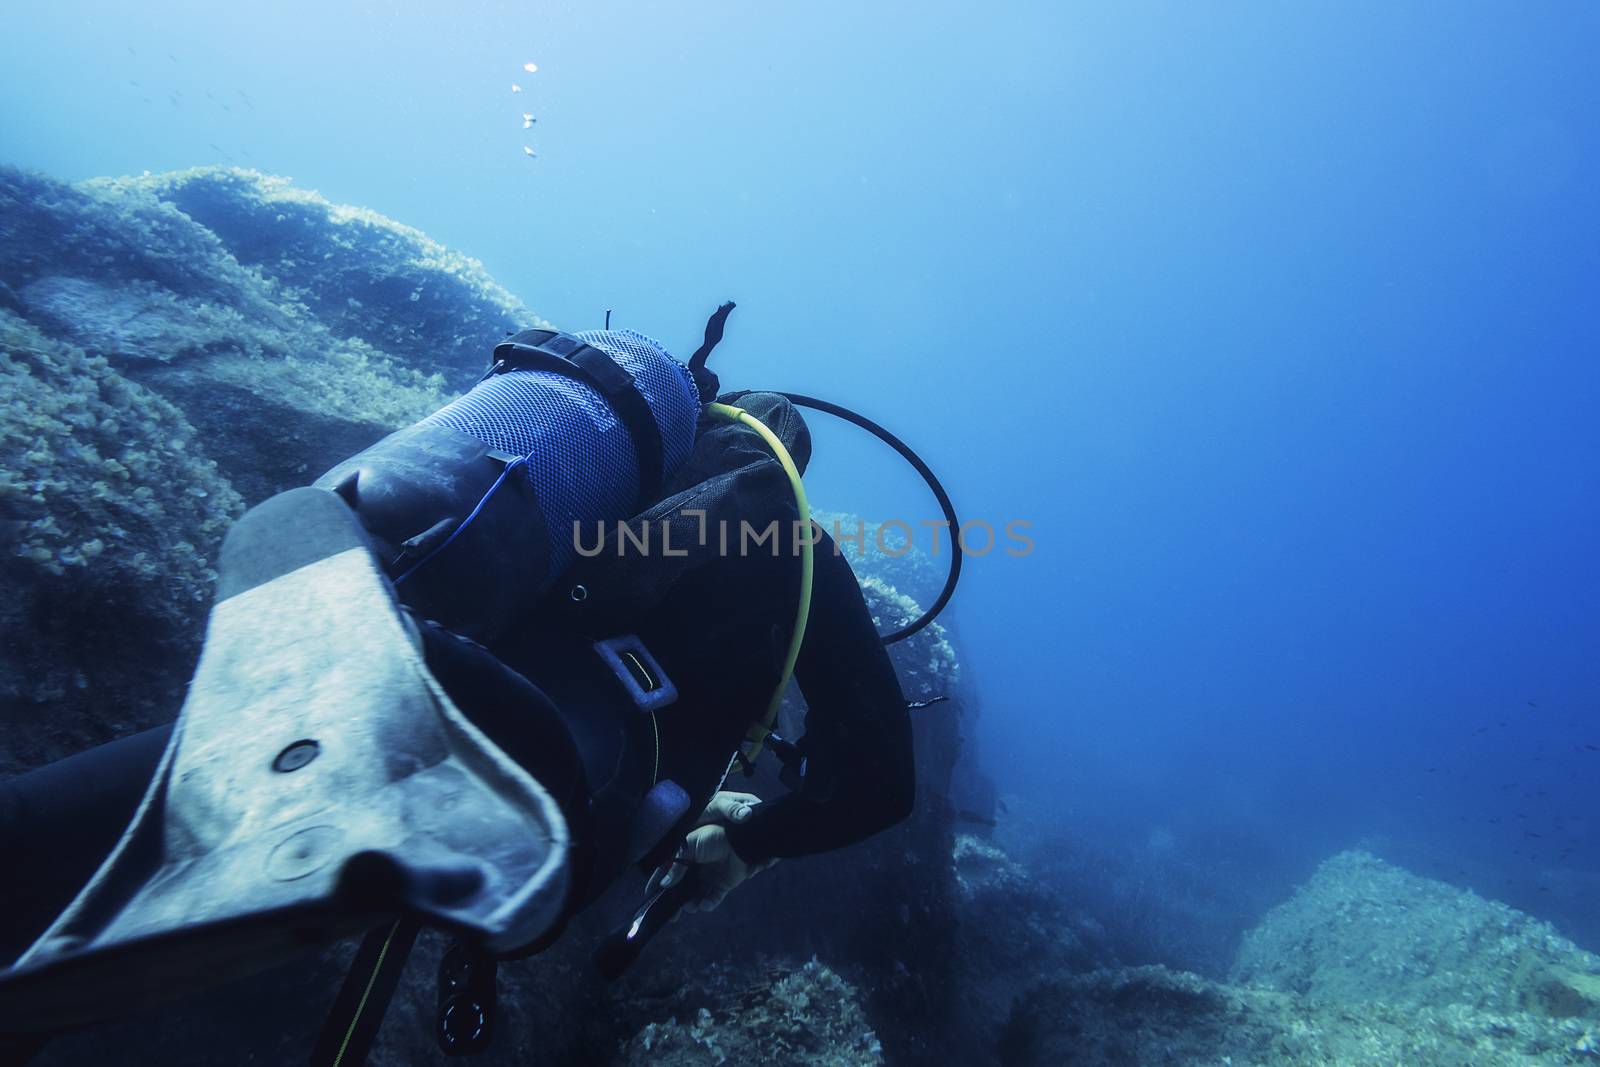 person diving near the rocks of the sea floor of a blue and turquoise sea, the stones are covered with small seaweed. The diver turns his back to the camera and one of his fins is in the foreground